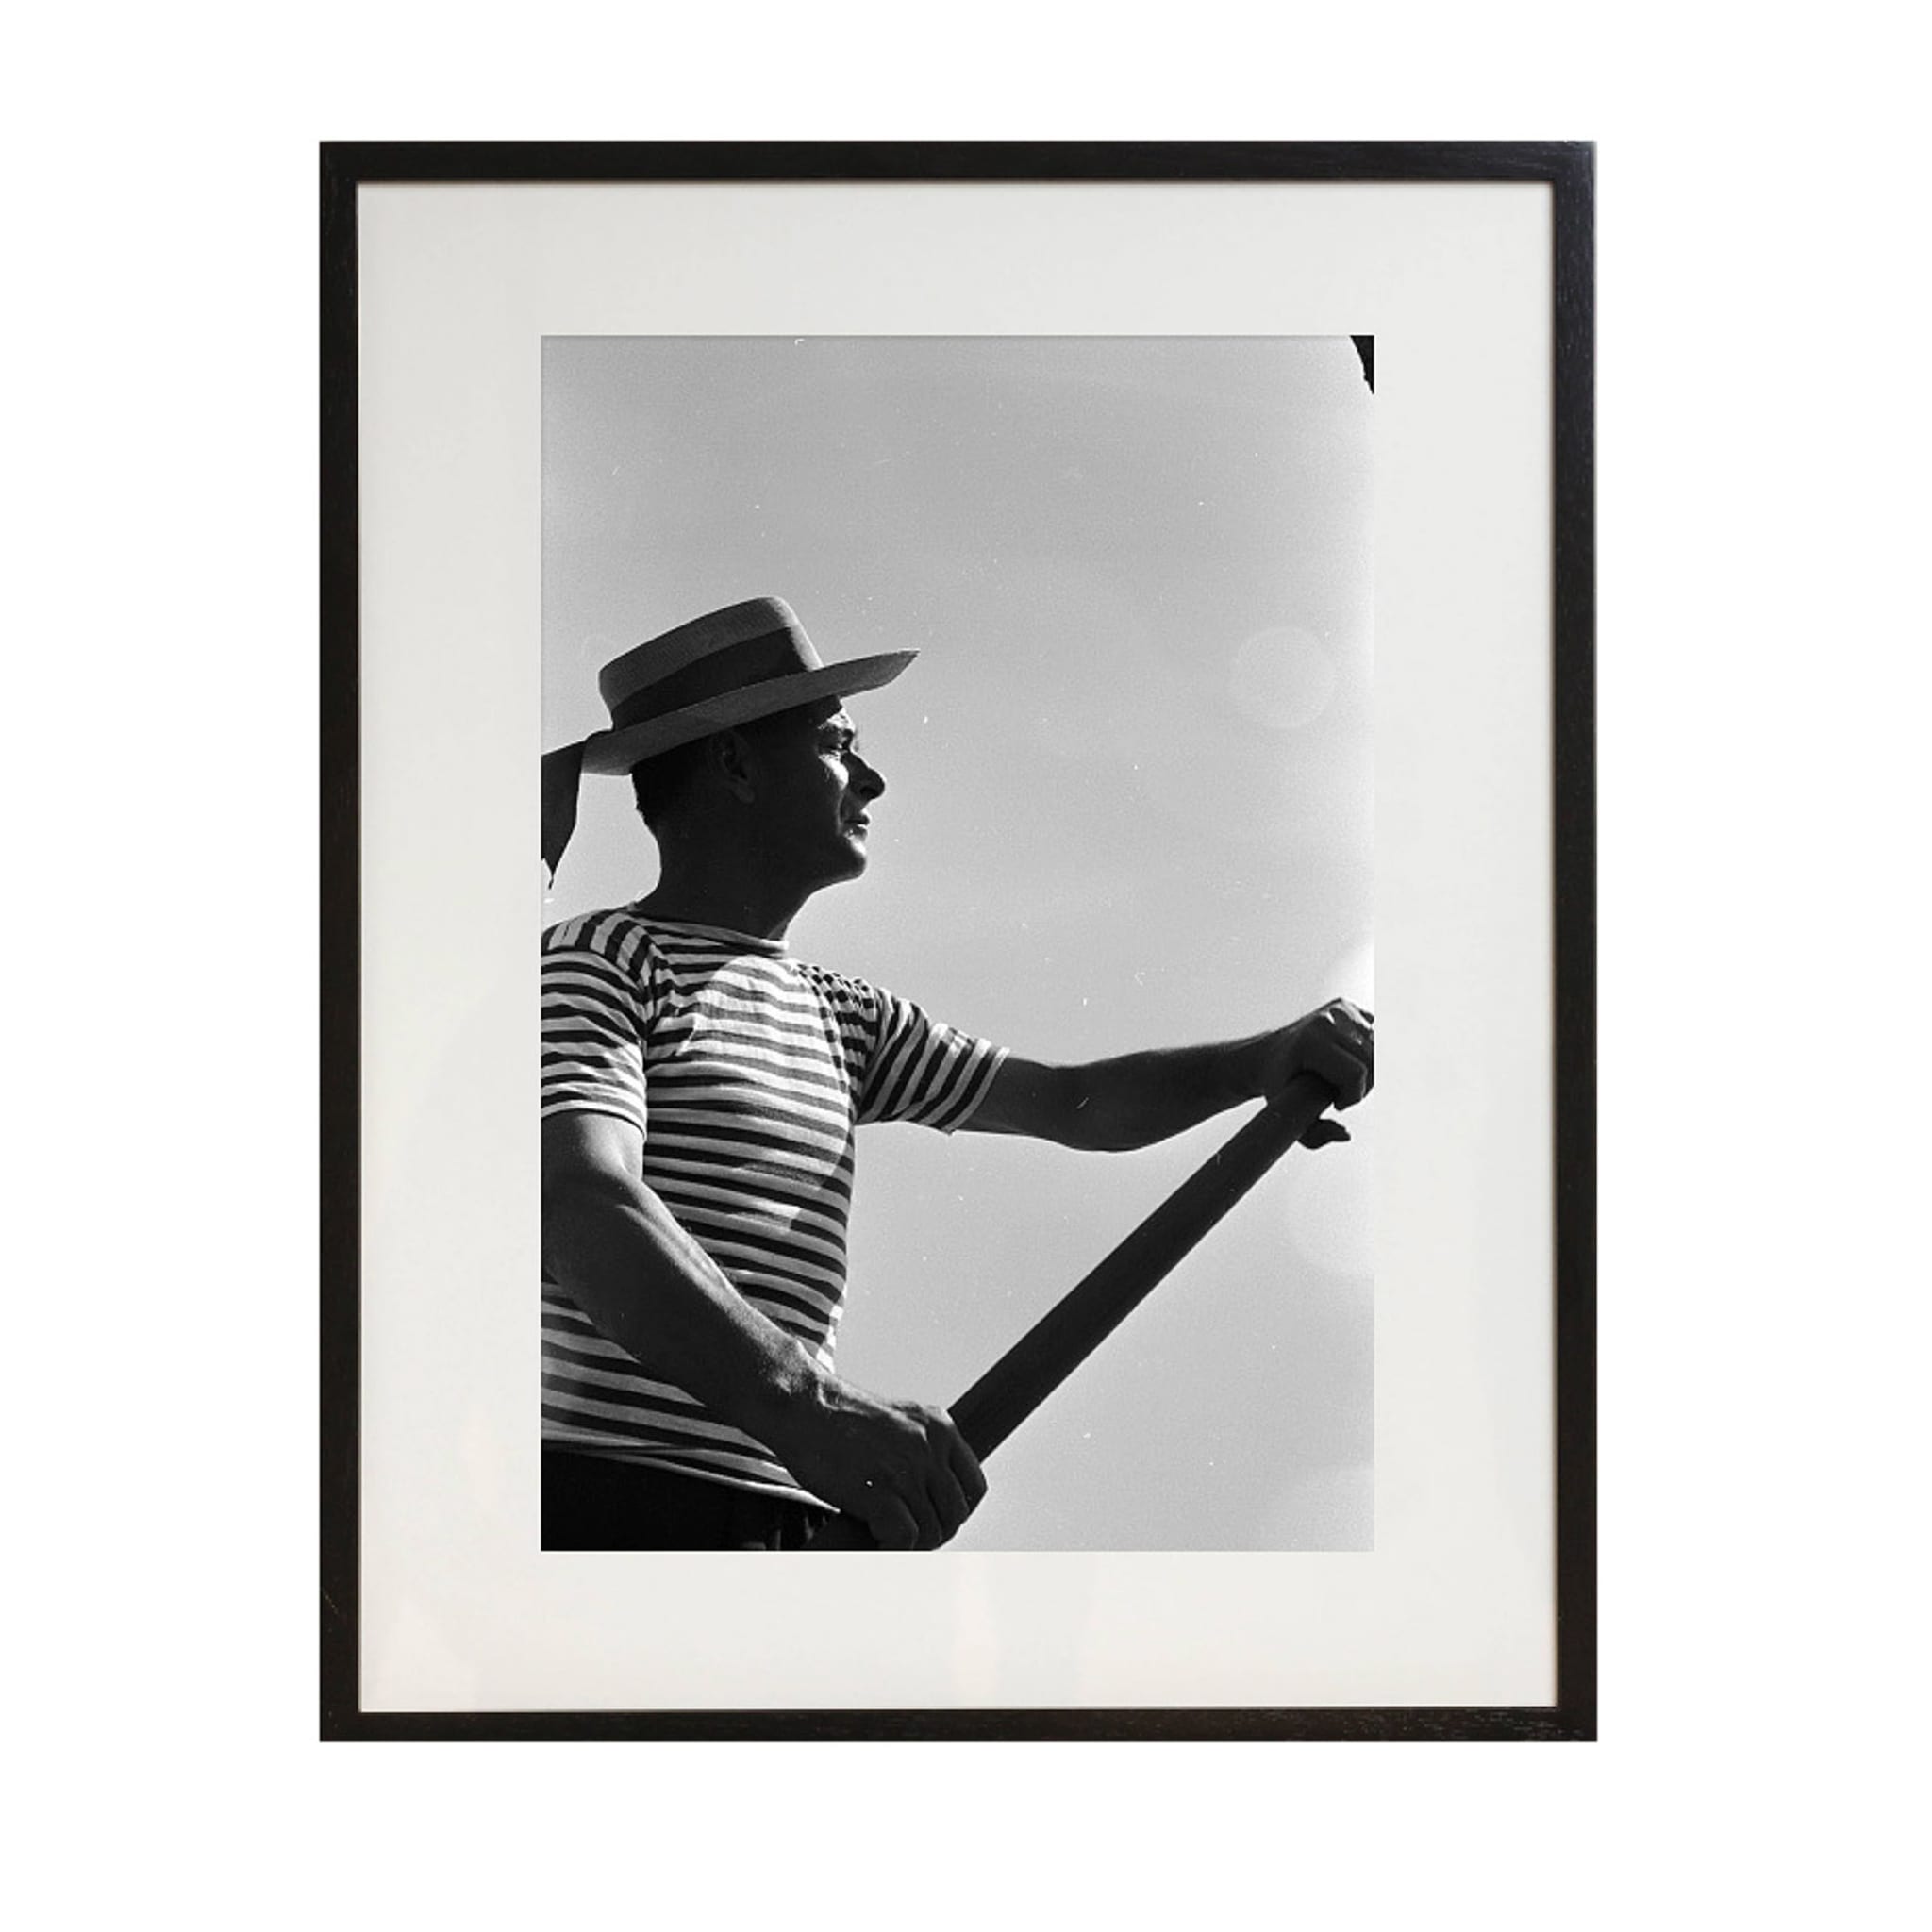 Gondolier #1 Framed Print by Nocella - Main view